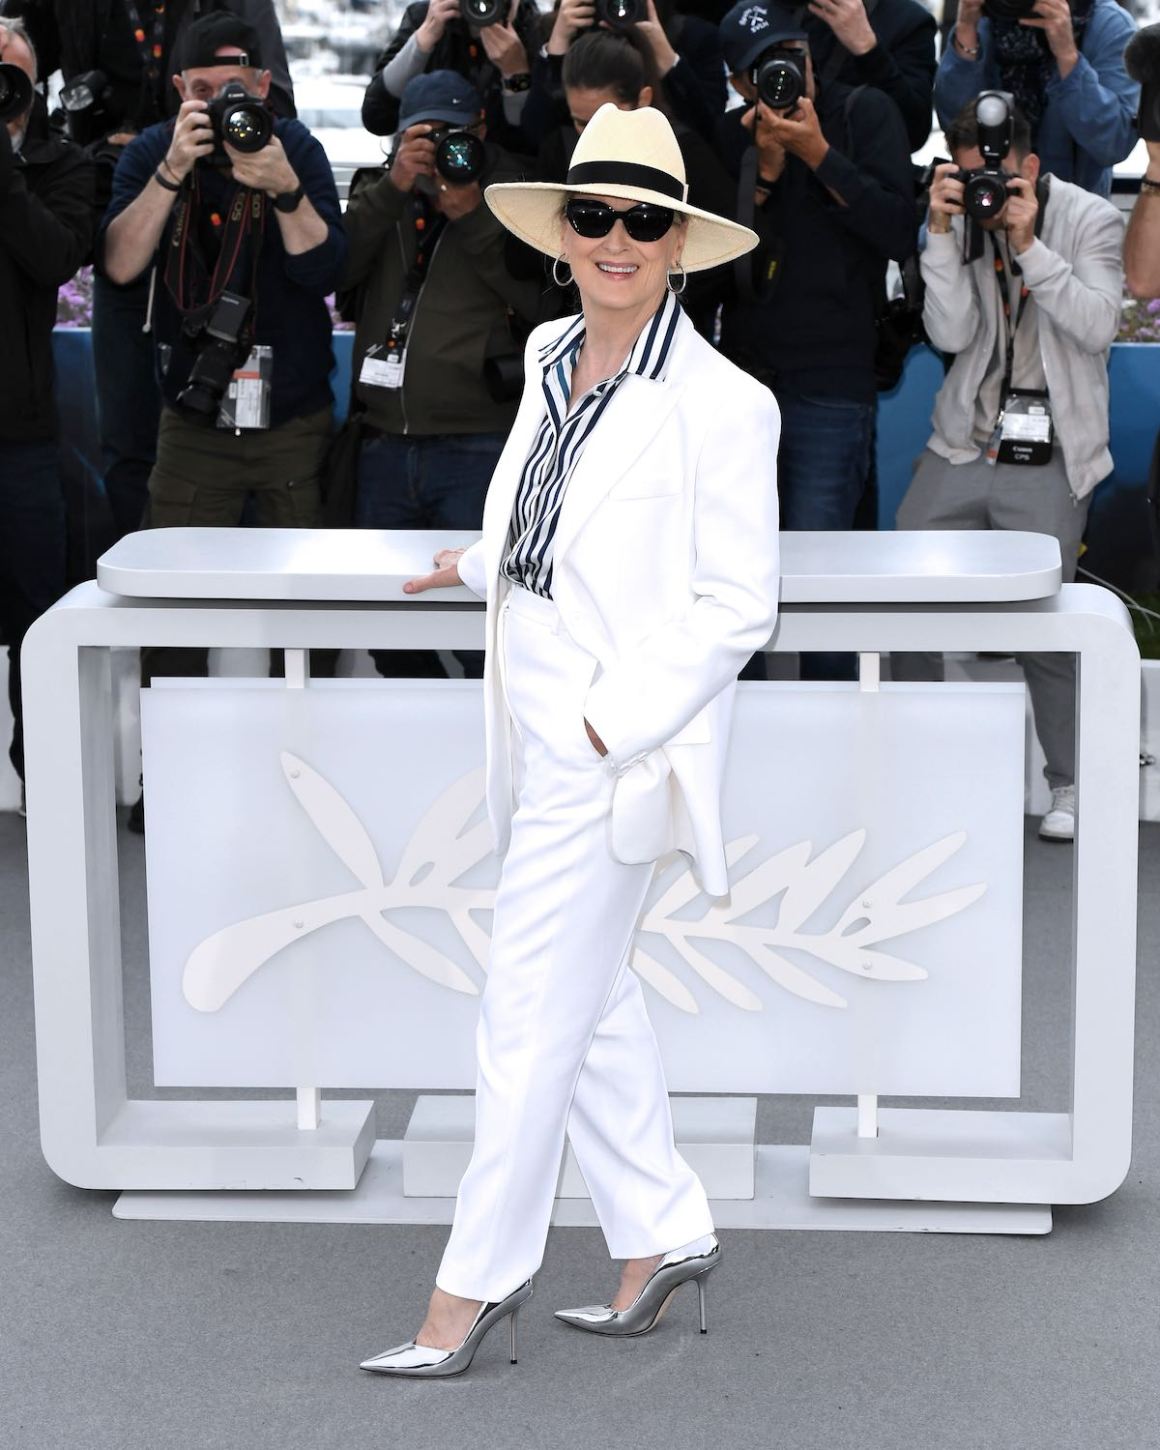 77th Cannes Film Festival – Honorary Palme d'Or Photocall